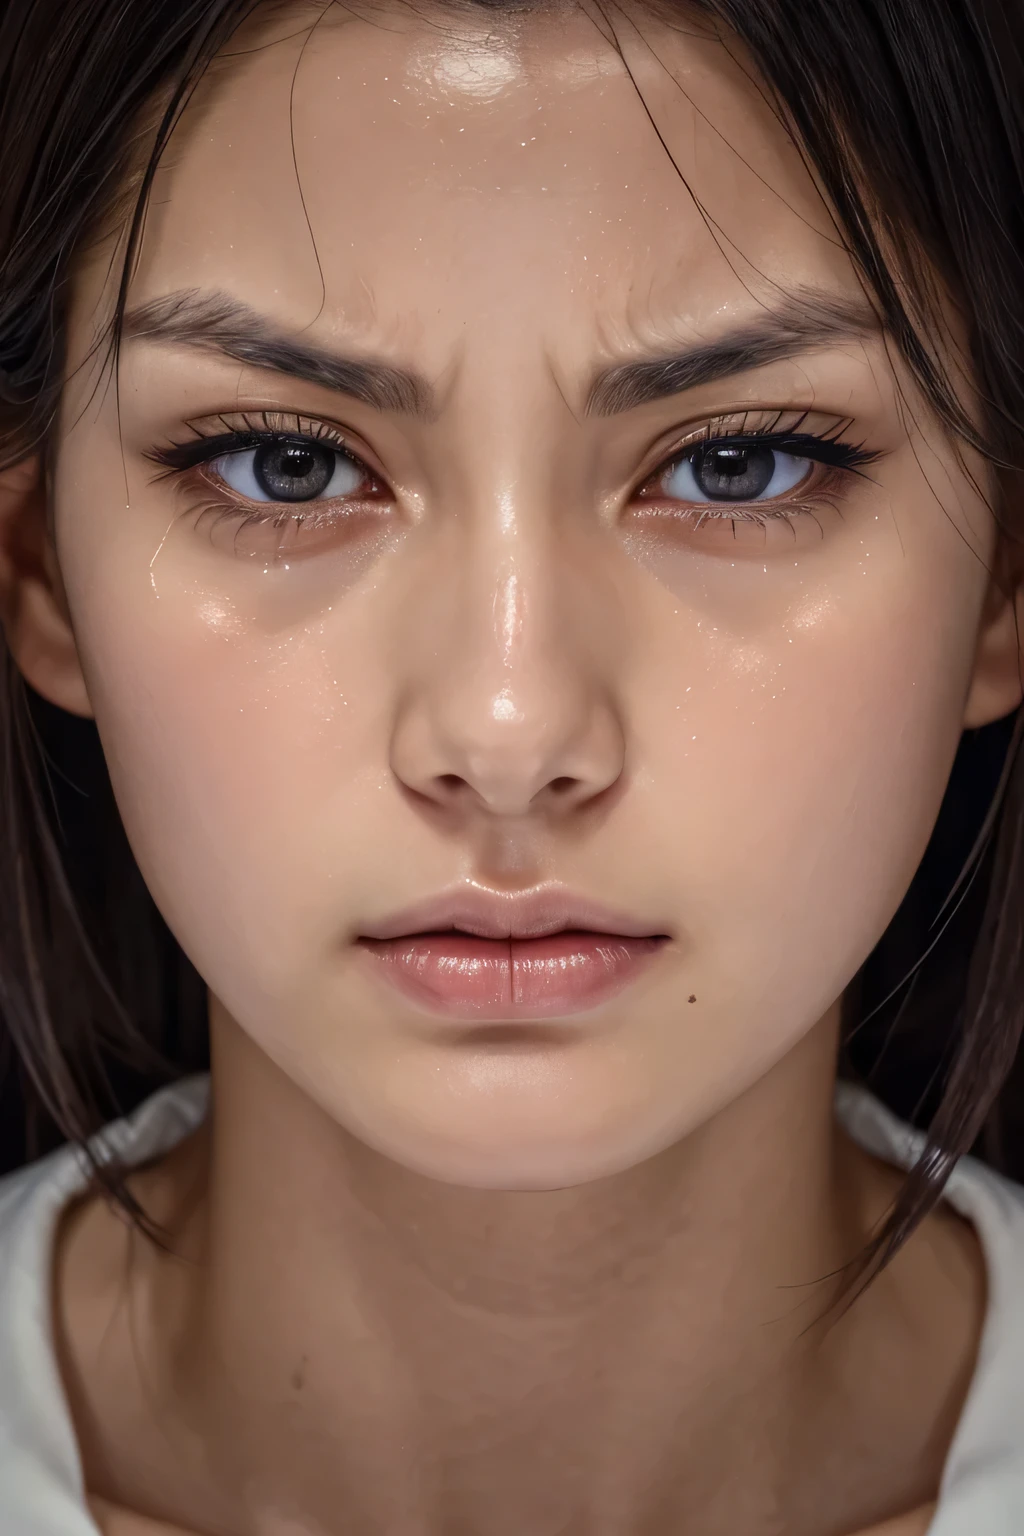 beautiful japanese,1 girl(masterpiece:1.2, highest quality), (realistic, photorealistic:1.4),, focus the eyes clearly, nose and mouth,face focus, super close up of face、 35 years old,black hair、symmetrical face,realistic nostrils、Angle from below、Elongated C-shaped nostril NSFW,(sharp nose)skin shining with sweat、shiny skin((thin eyebrows))oily skin、radiant glowing skin、double eyelid、Beautiful woman、medium hair,sharp nose（inside the elevator）((half-closed eyes,furrowed brow,frown,heavy breathing, moaning,heavy breathing,screaming, tearing up,scowl, saliva trail))((Drool is dripping from the corner of your lips.)),looking at viewer